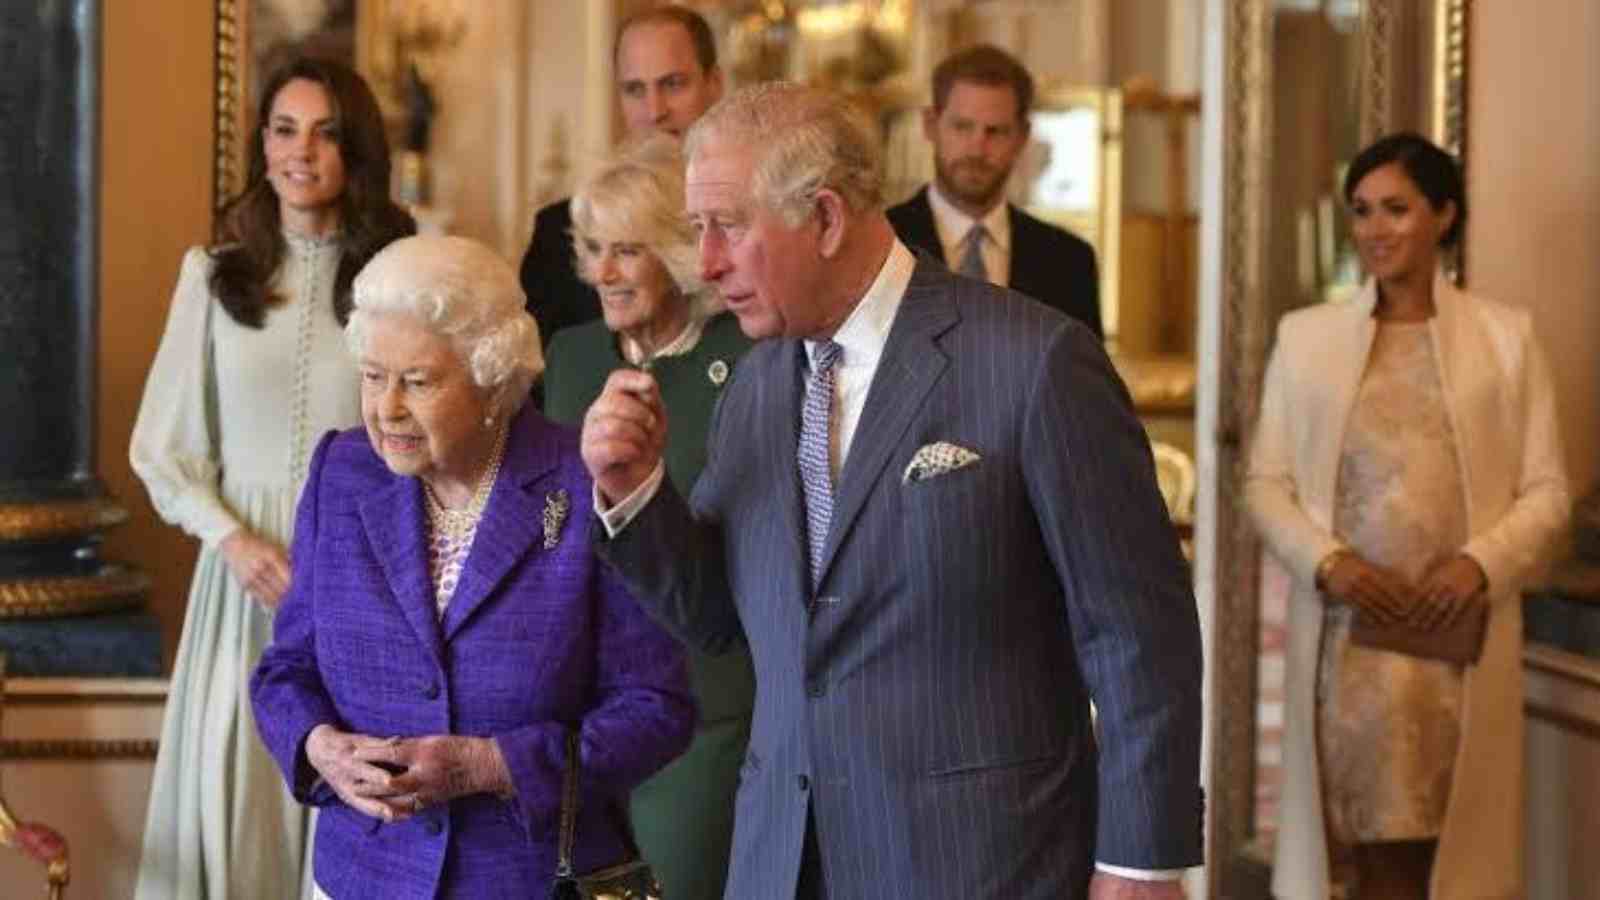 The royal family is exempted from paying taxes